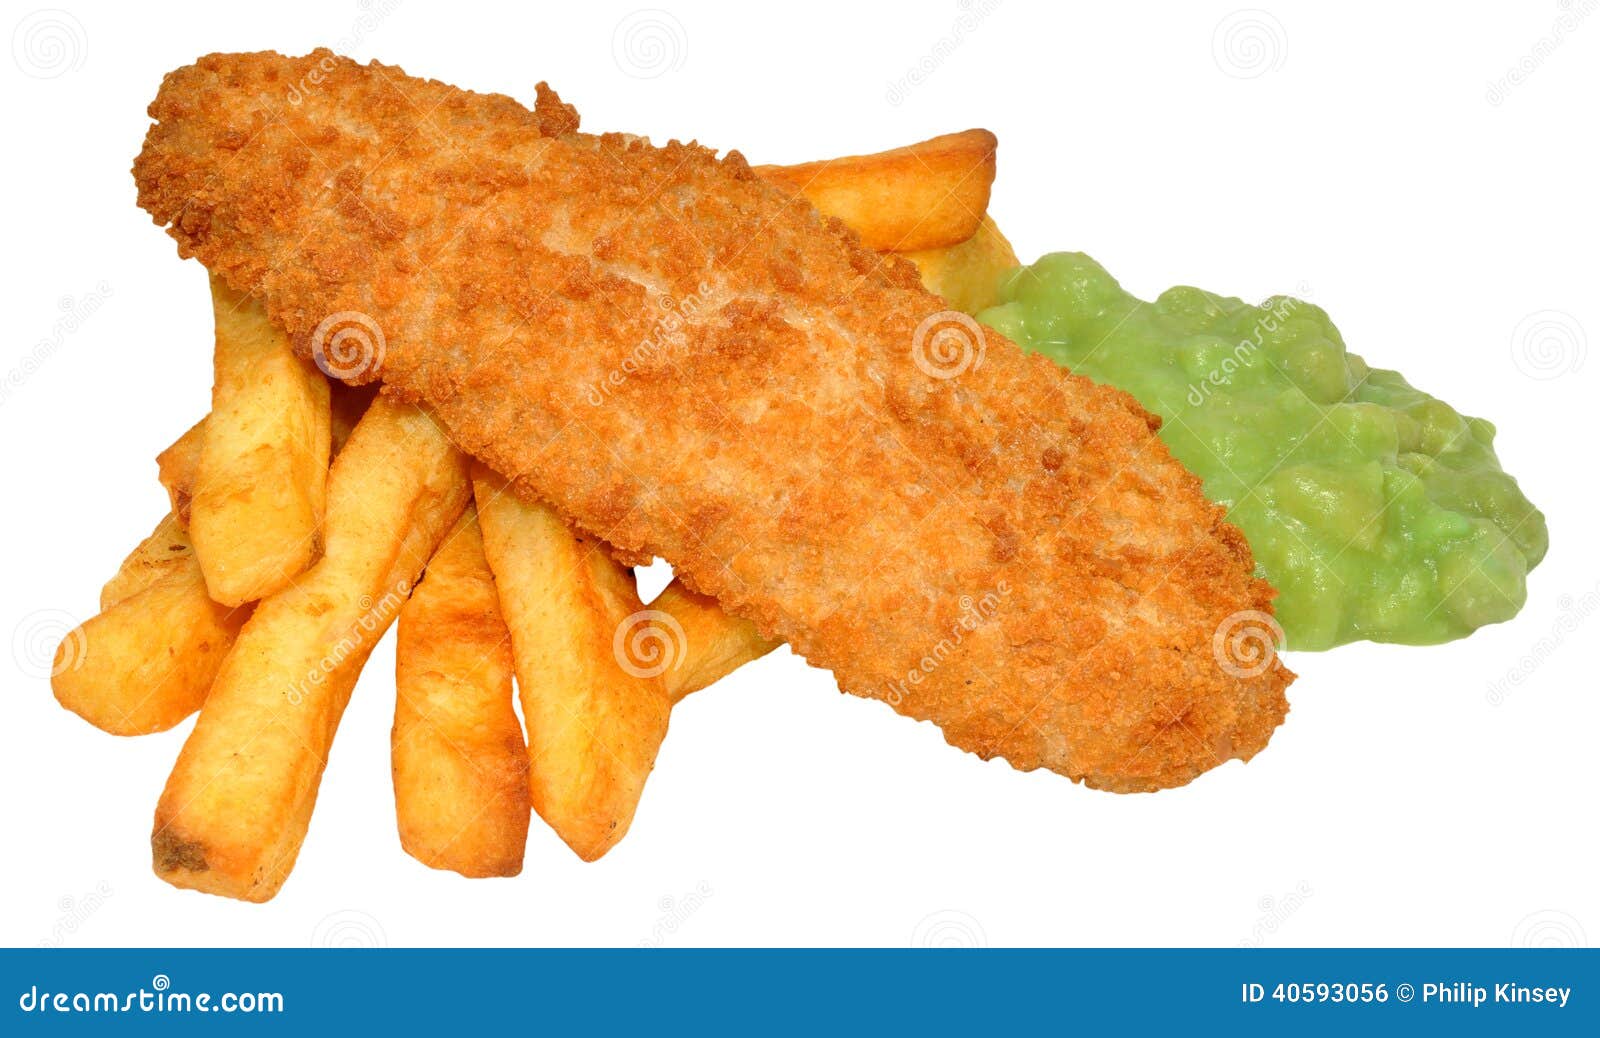 clipart of fish and chips - photo #33